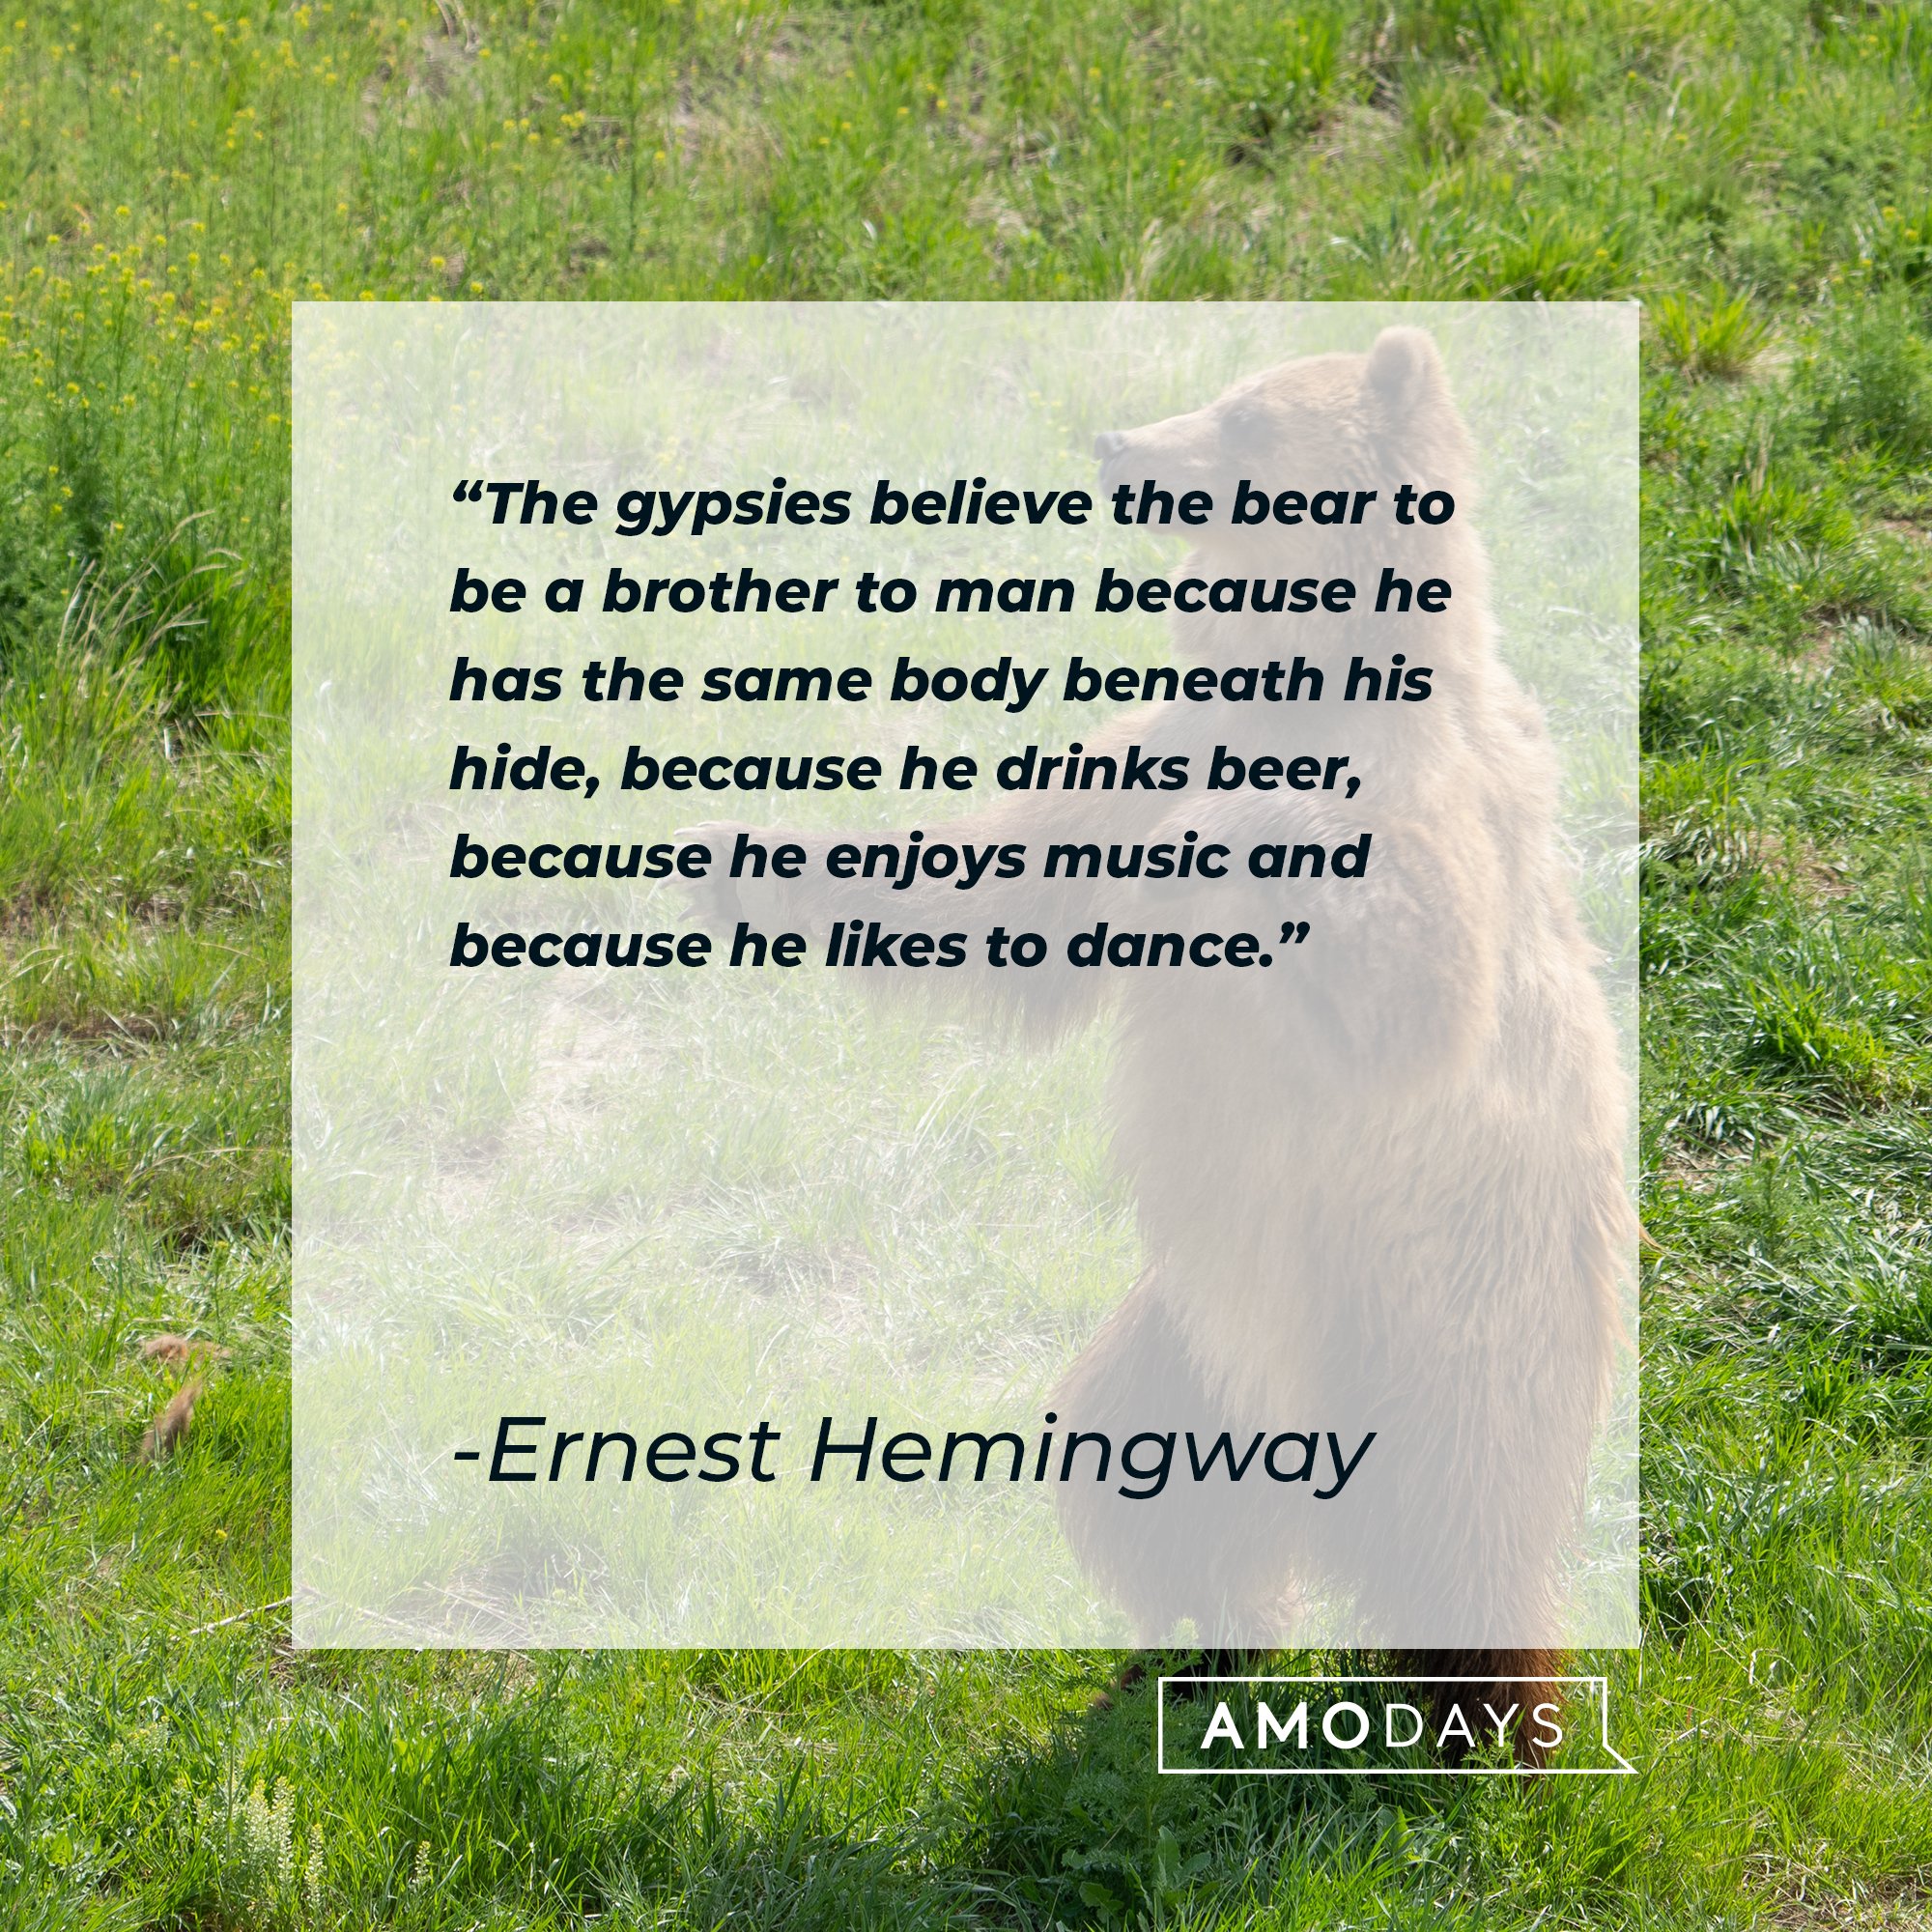 Ernest Hemingway’s quote: "The gypsies believe the bear to be a brother to man because he has the same body beneath his hide, because he drinks beer, because he enjoys music and because he likes to dance." | Image: AmoDays